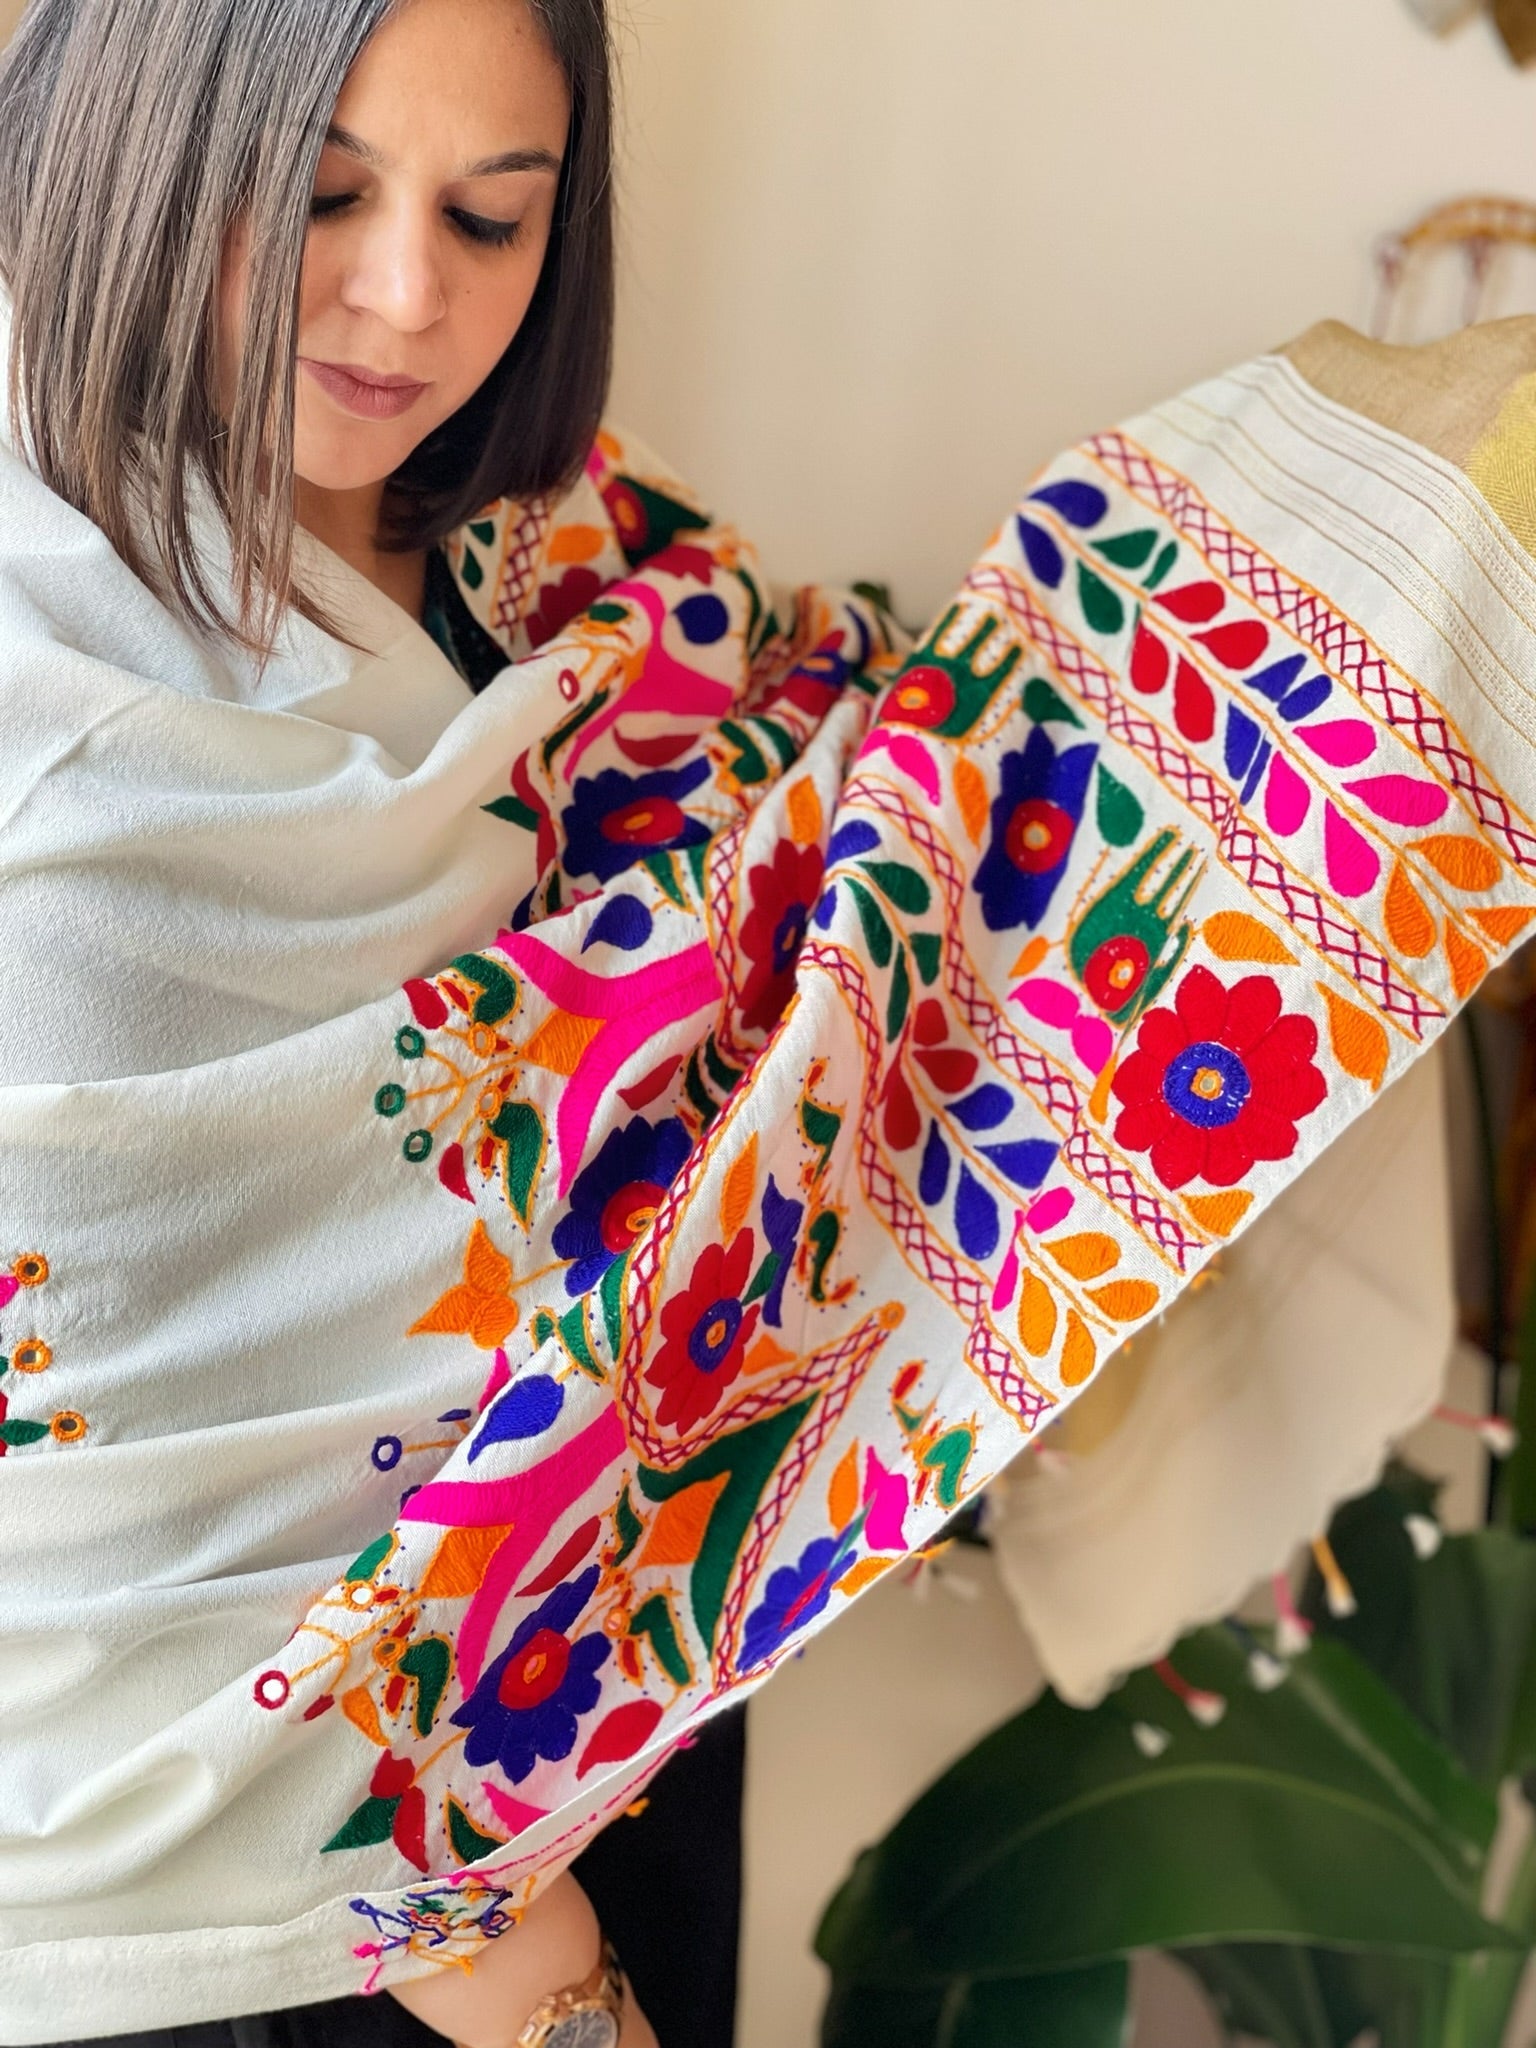 Handwoven Woollen Shawl with Hand Embroidery